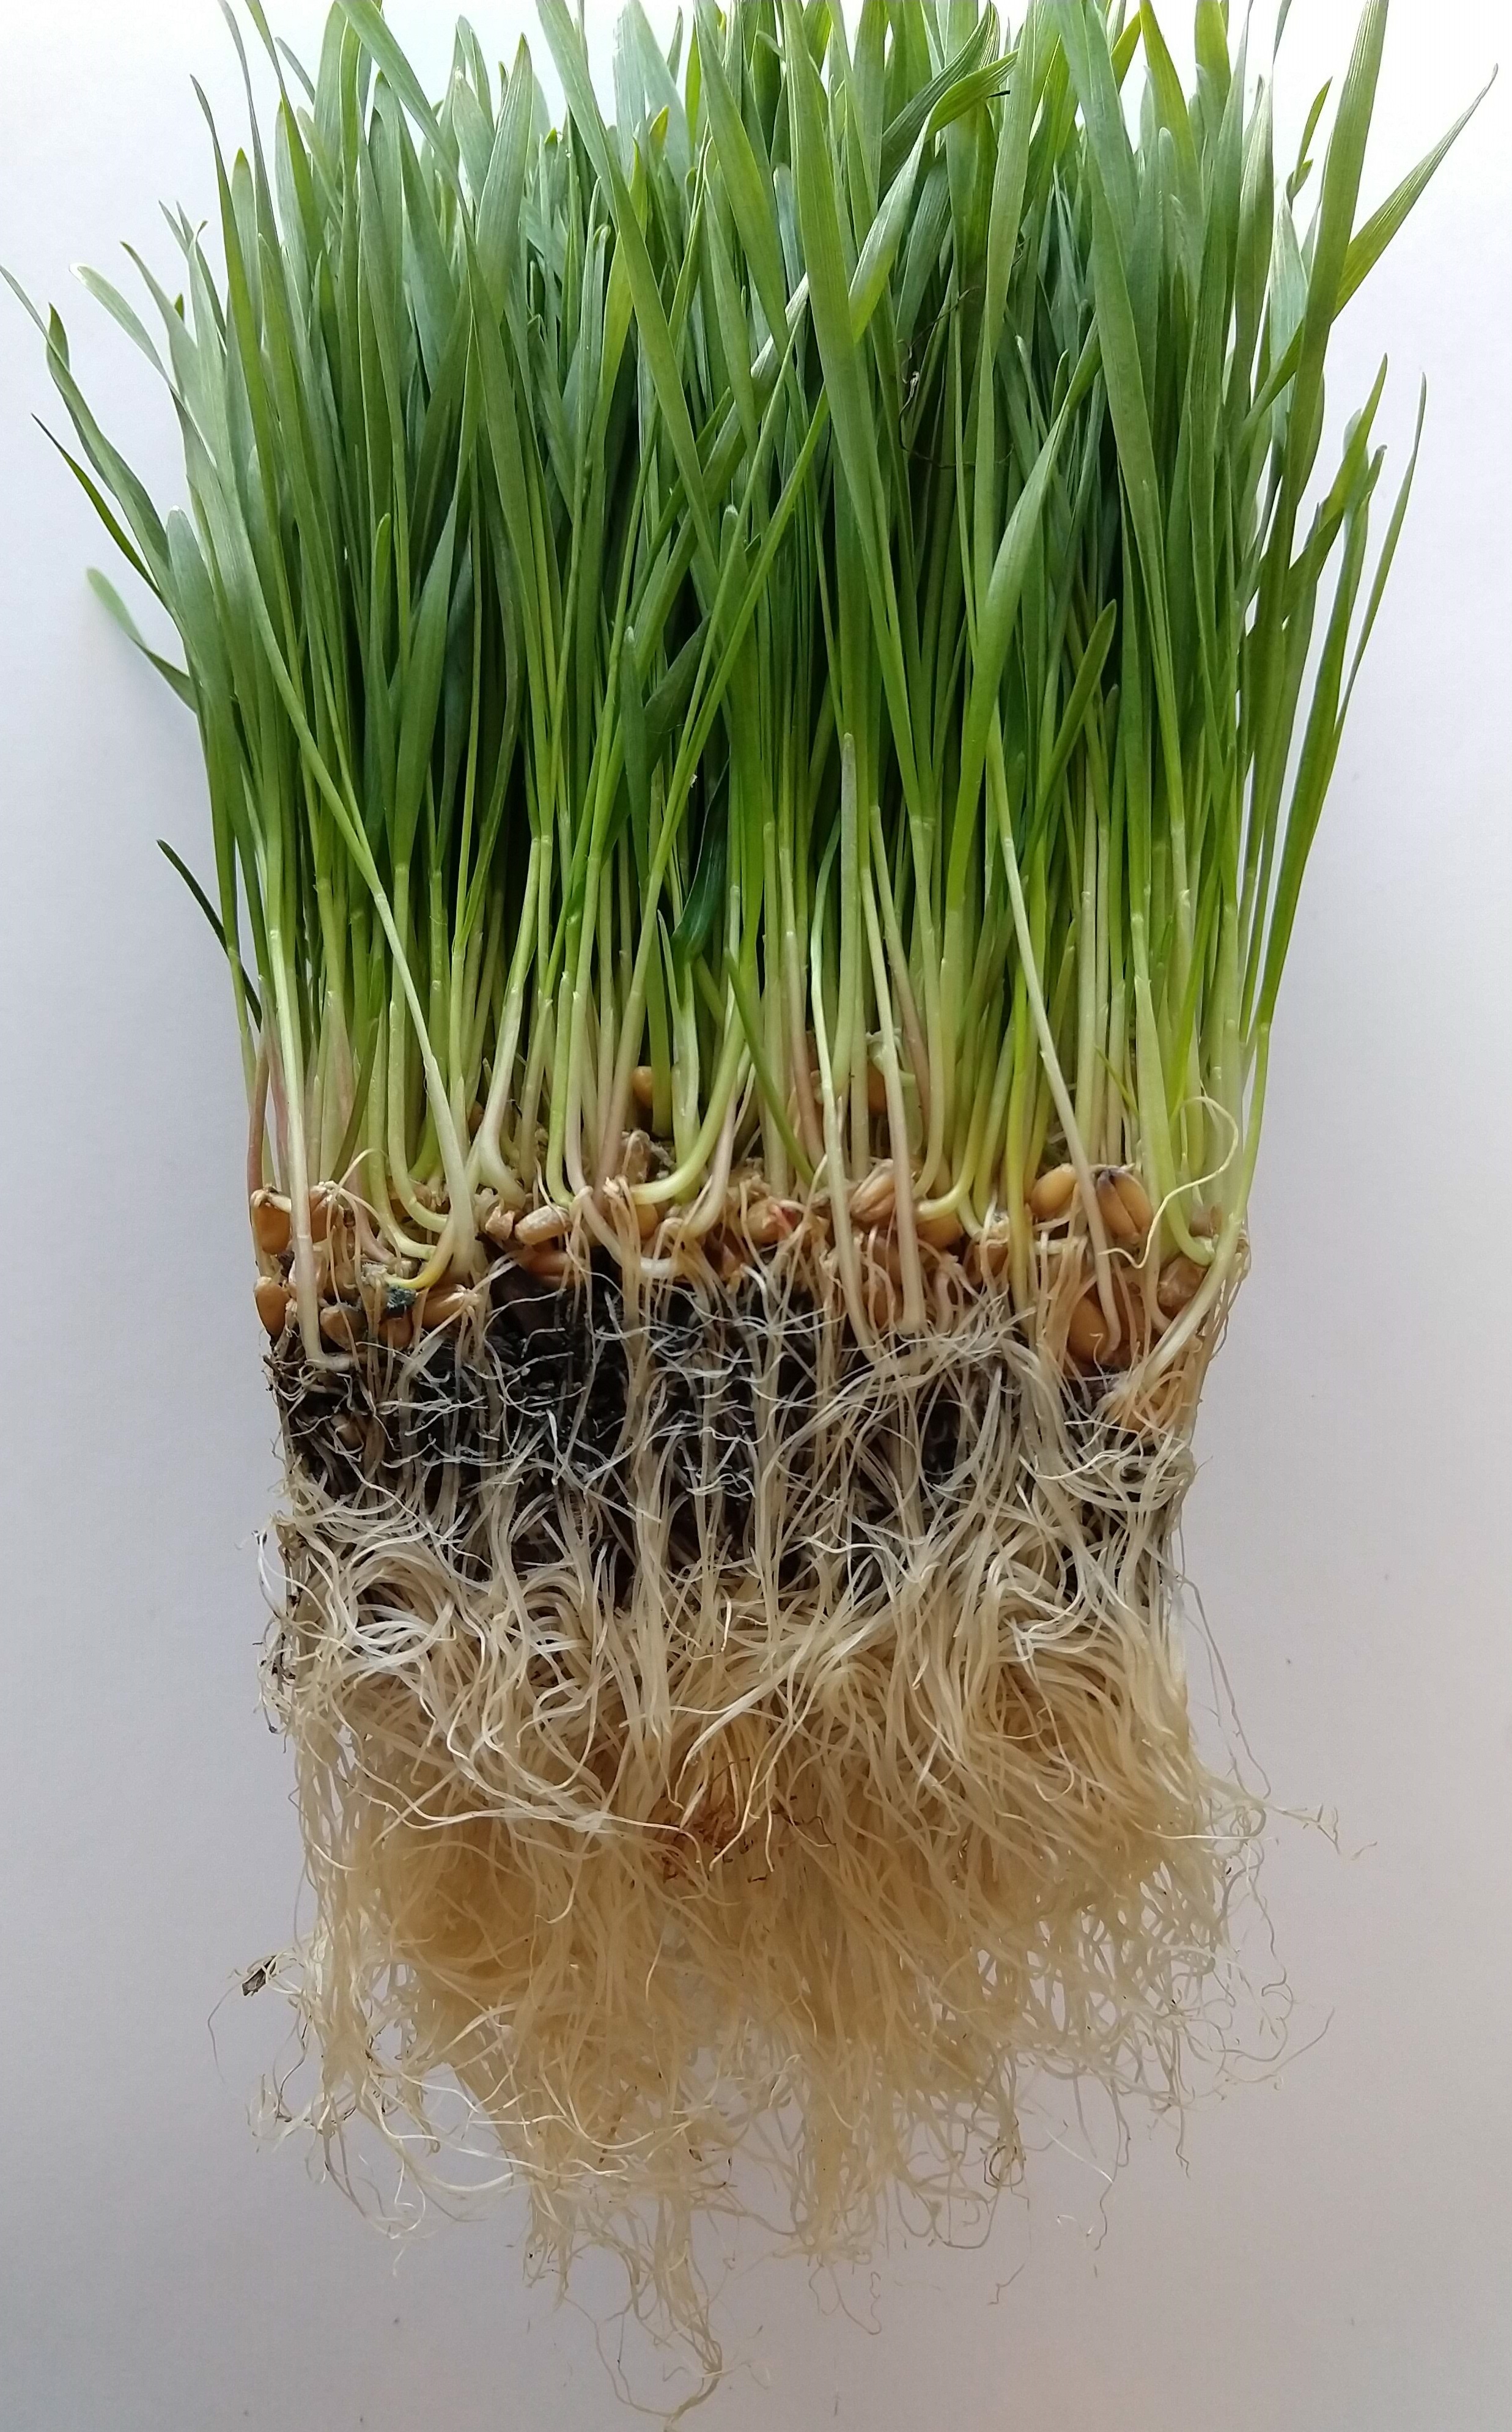 Newly sprouted wheatgrass removed from its container